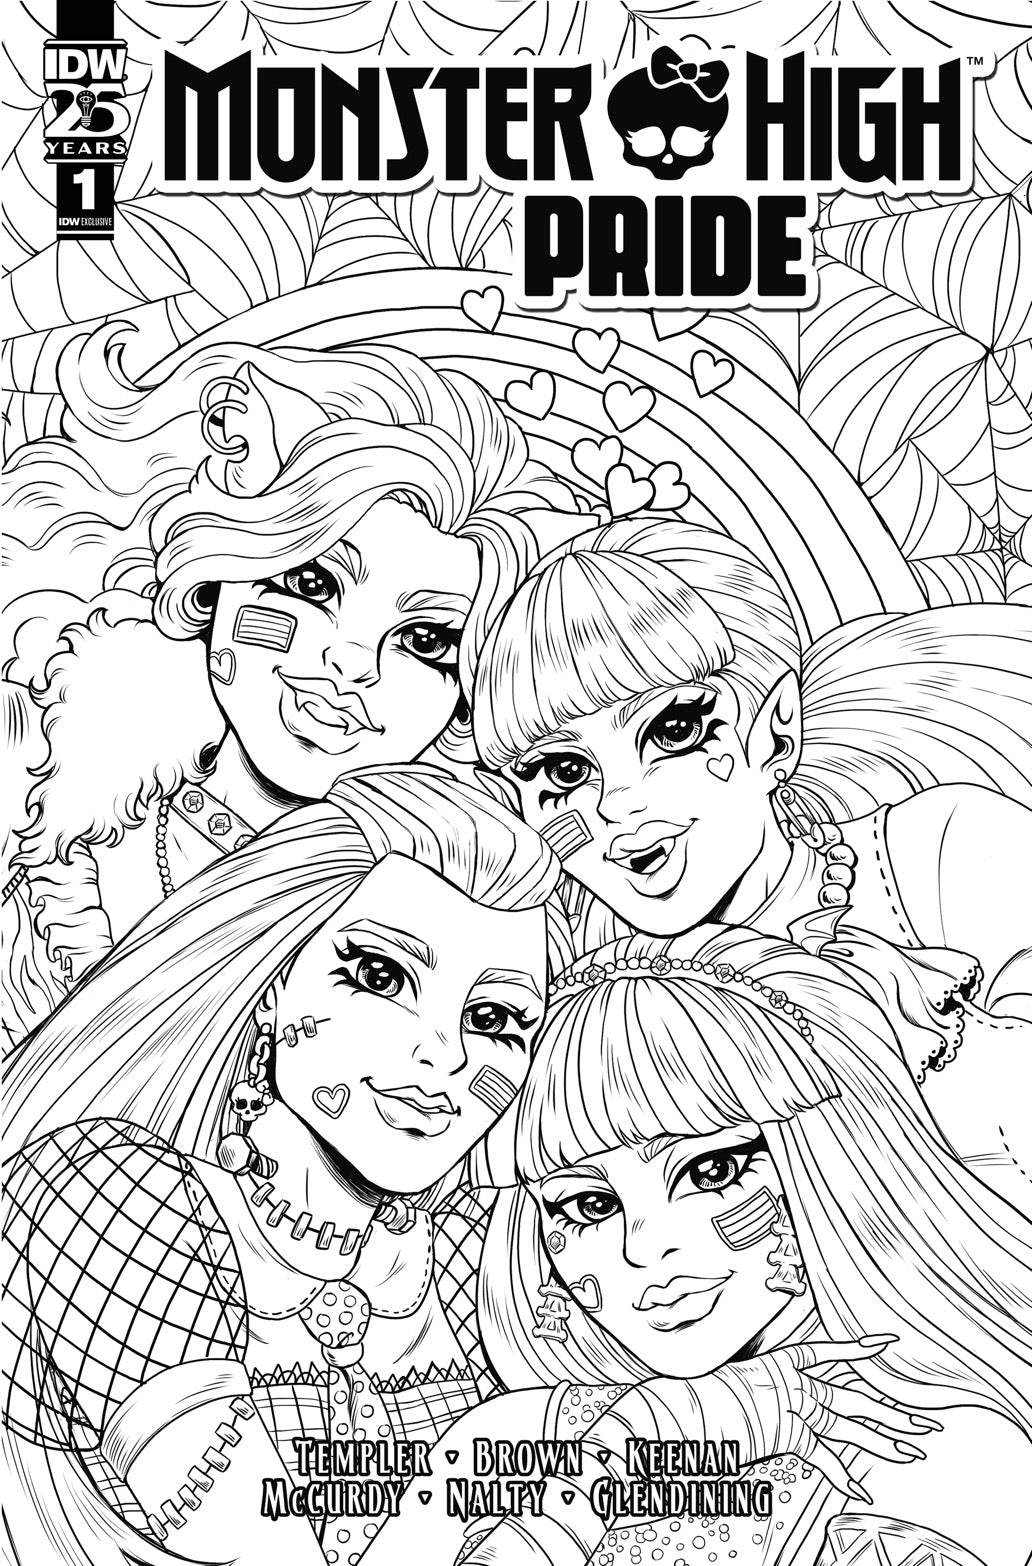 Monster High Pride 2024 - IDW Exclusive